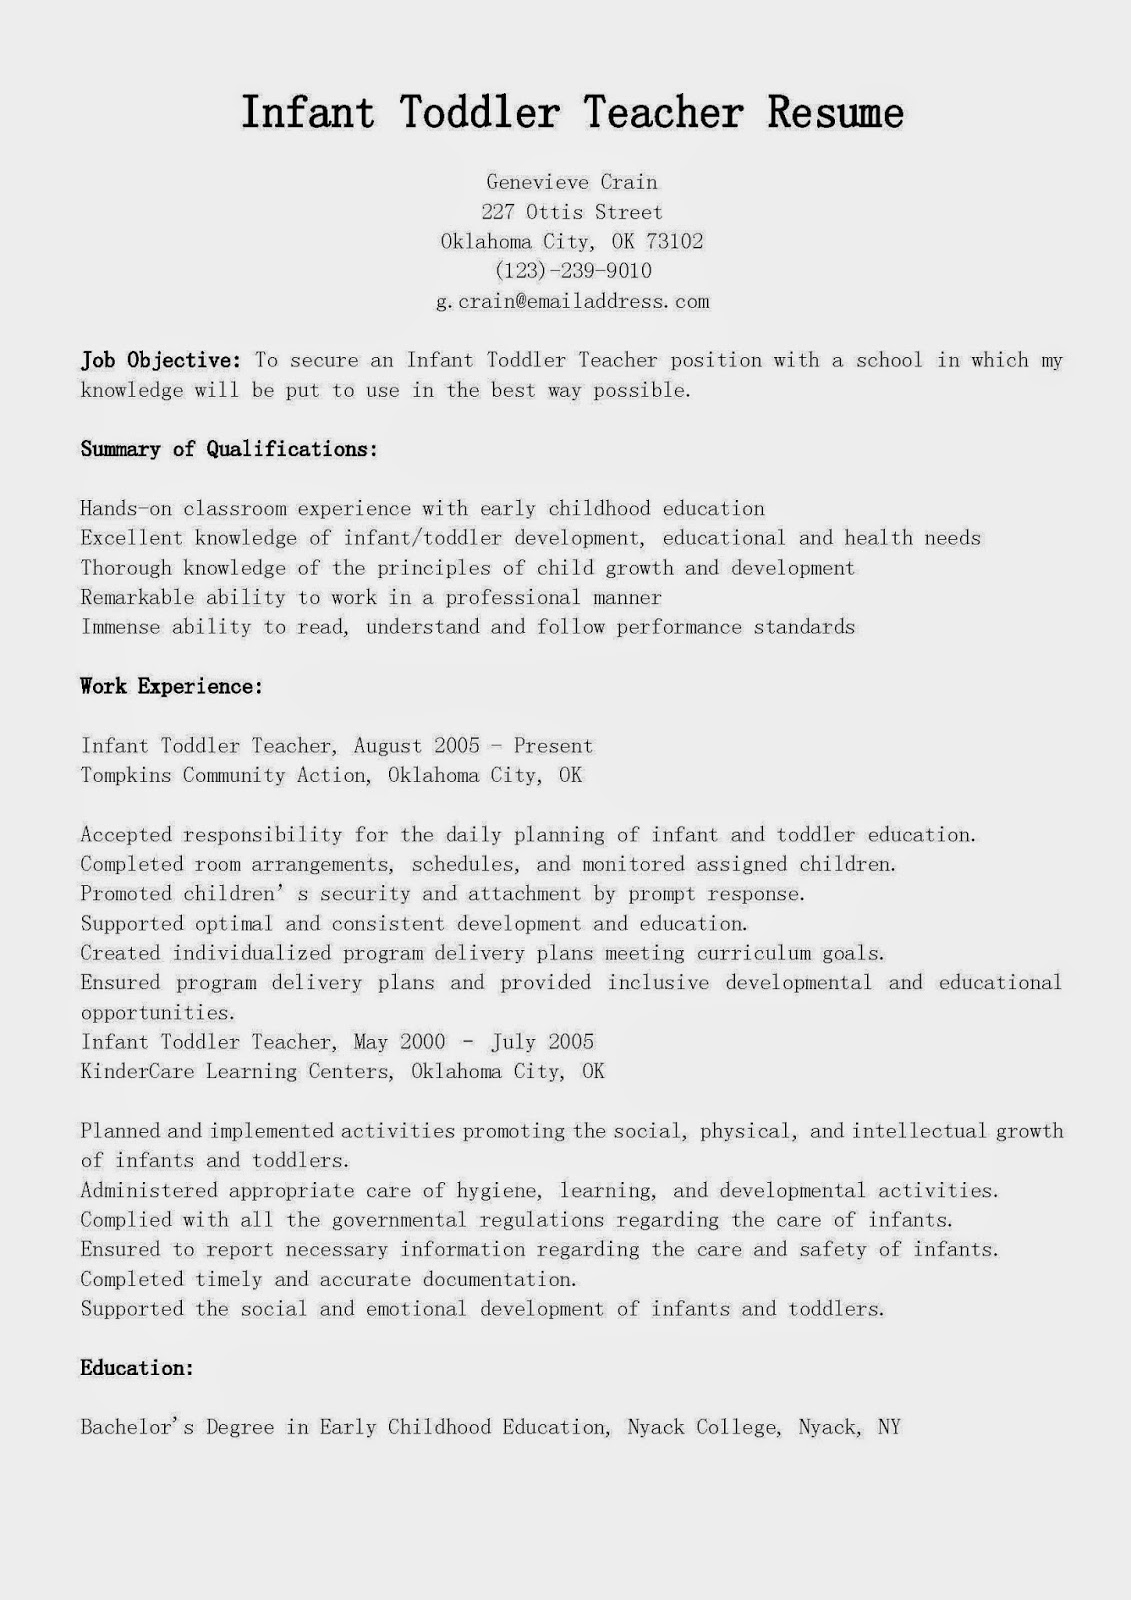 Sample resume working with children